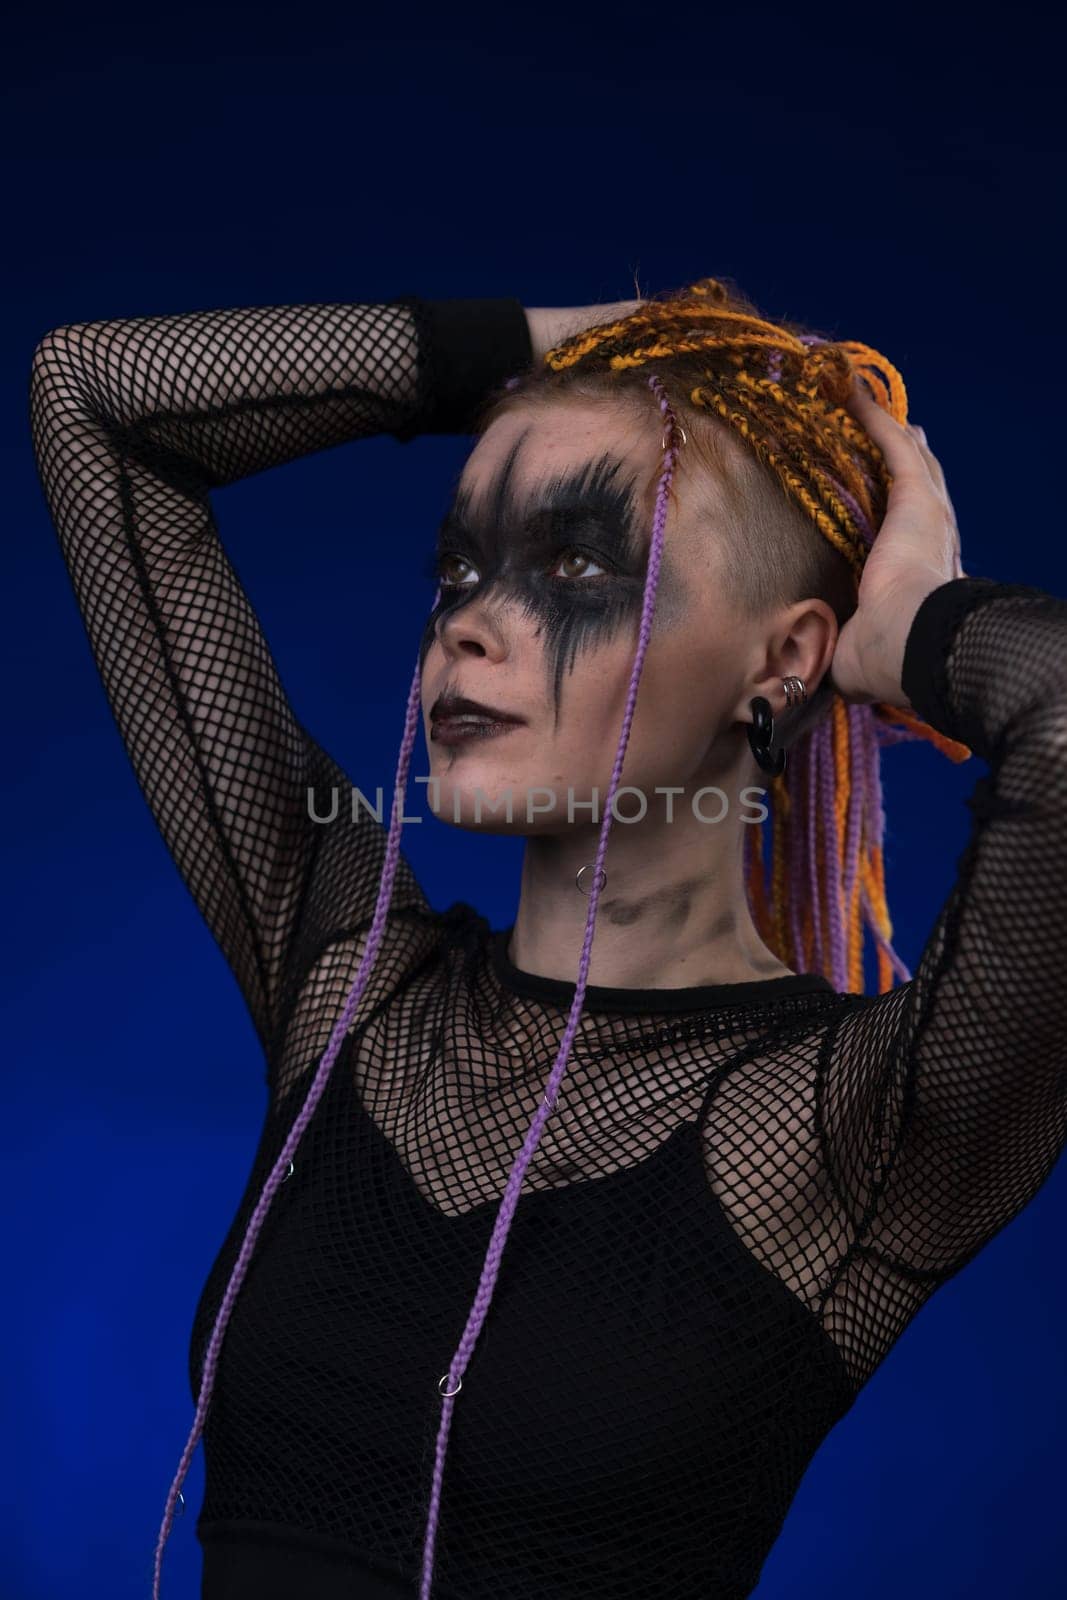 Cinematic portrait of young woman with orange braids hairdo and horror stage make-up painted on face by Alexander-Piragis